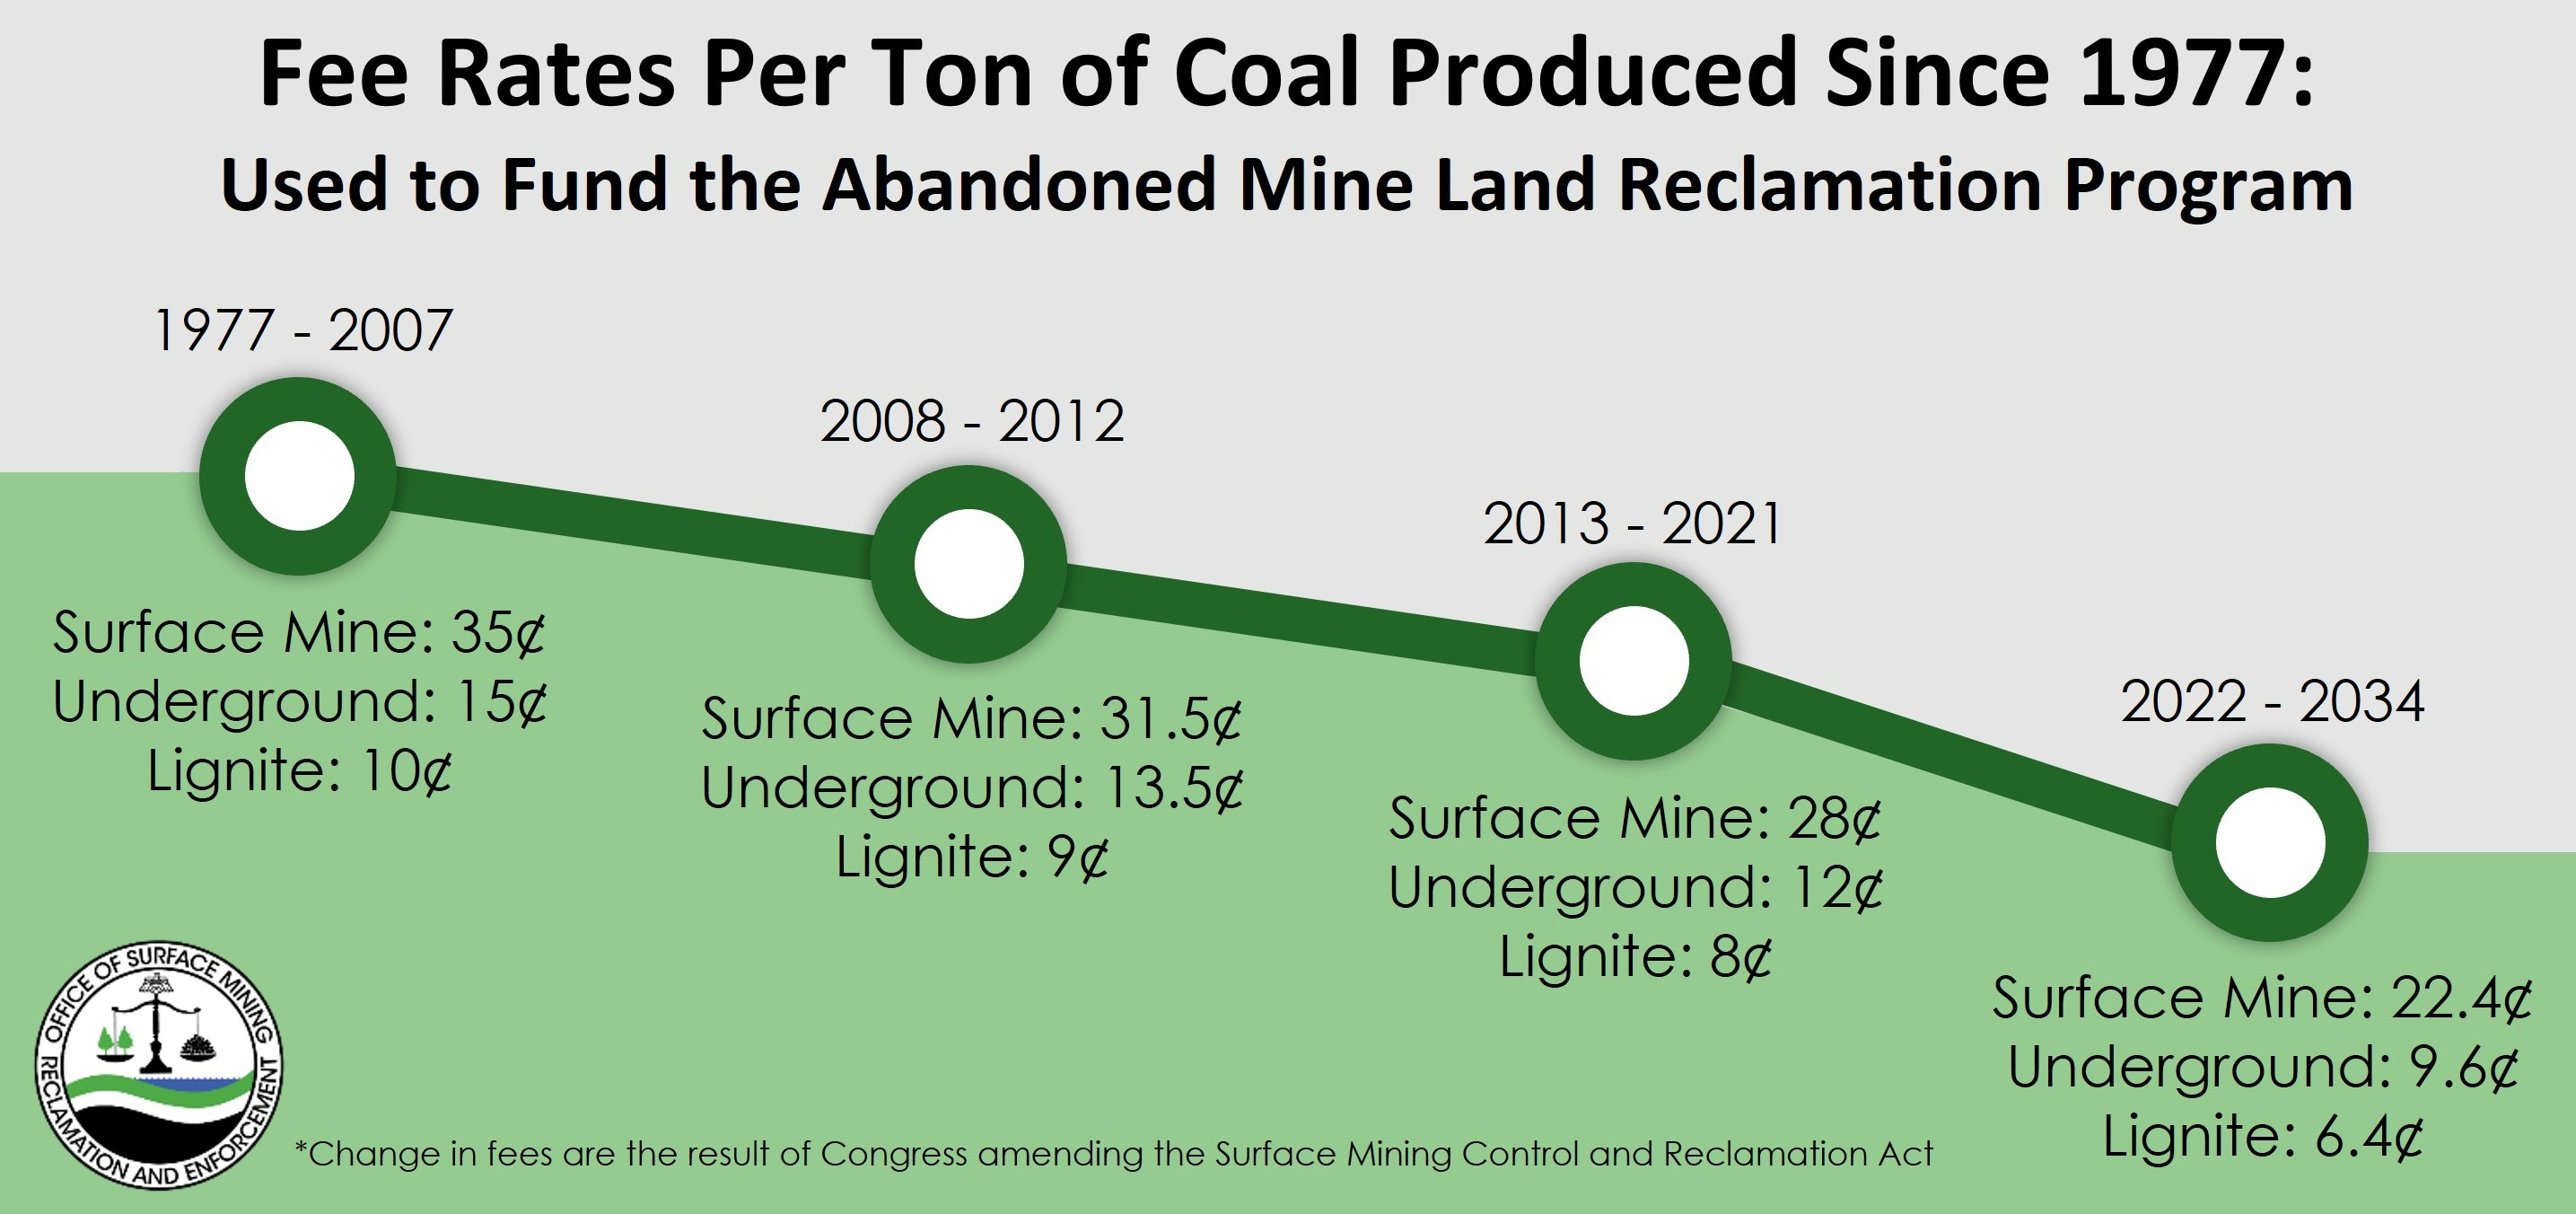 Graphic displaying the fee rates per ton of coal produced since the implementation of SMCRA (August 3, 1977). The collected fees are used to fund the Abandoned Mine Land Reclamation Program. From 1977 to 2007 surface mines paid 35 cents per ton, underground mines paid 15 cents per ton, and lignite mines paid 10 cents per ton. From 2008 to 2012 surface mines paid 31.5 cents per ton, underground mines paid 13.5 cents per ton, and lignite mines paid 9 cents per ton. From 2013 to 2021 surface mines paid 28 cents per ton, underground mines paid 12 cents per ton, and lignite mines paid 8 cents per ton. And from 2022 to 2034 surface mines are paying 22.4 cents per ton, underground mines are paying 9.6 cents per ton, and lignite mines are paying 6.4 cents per ton. Note, change in fees are the result of Congress amending the Surface Mining Control and Reclamation Act.